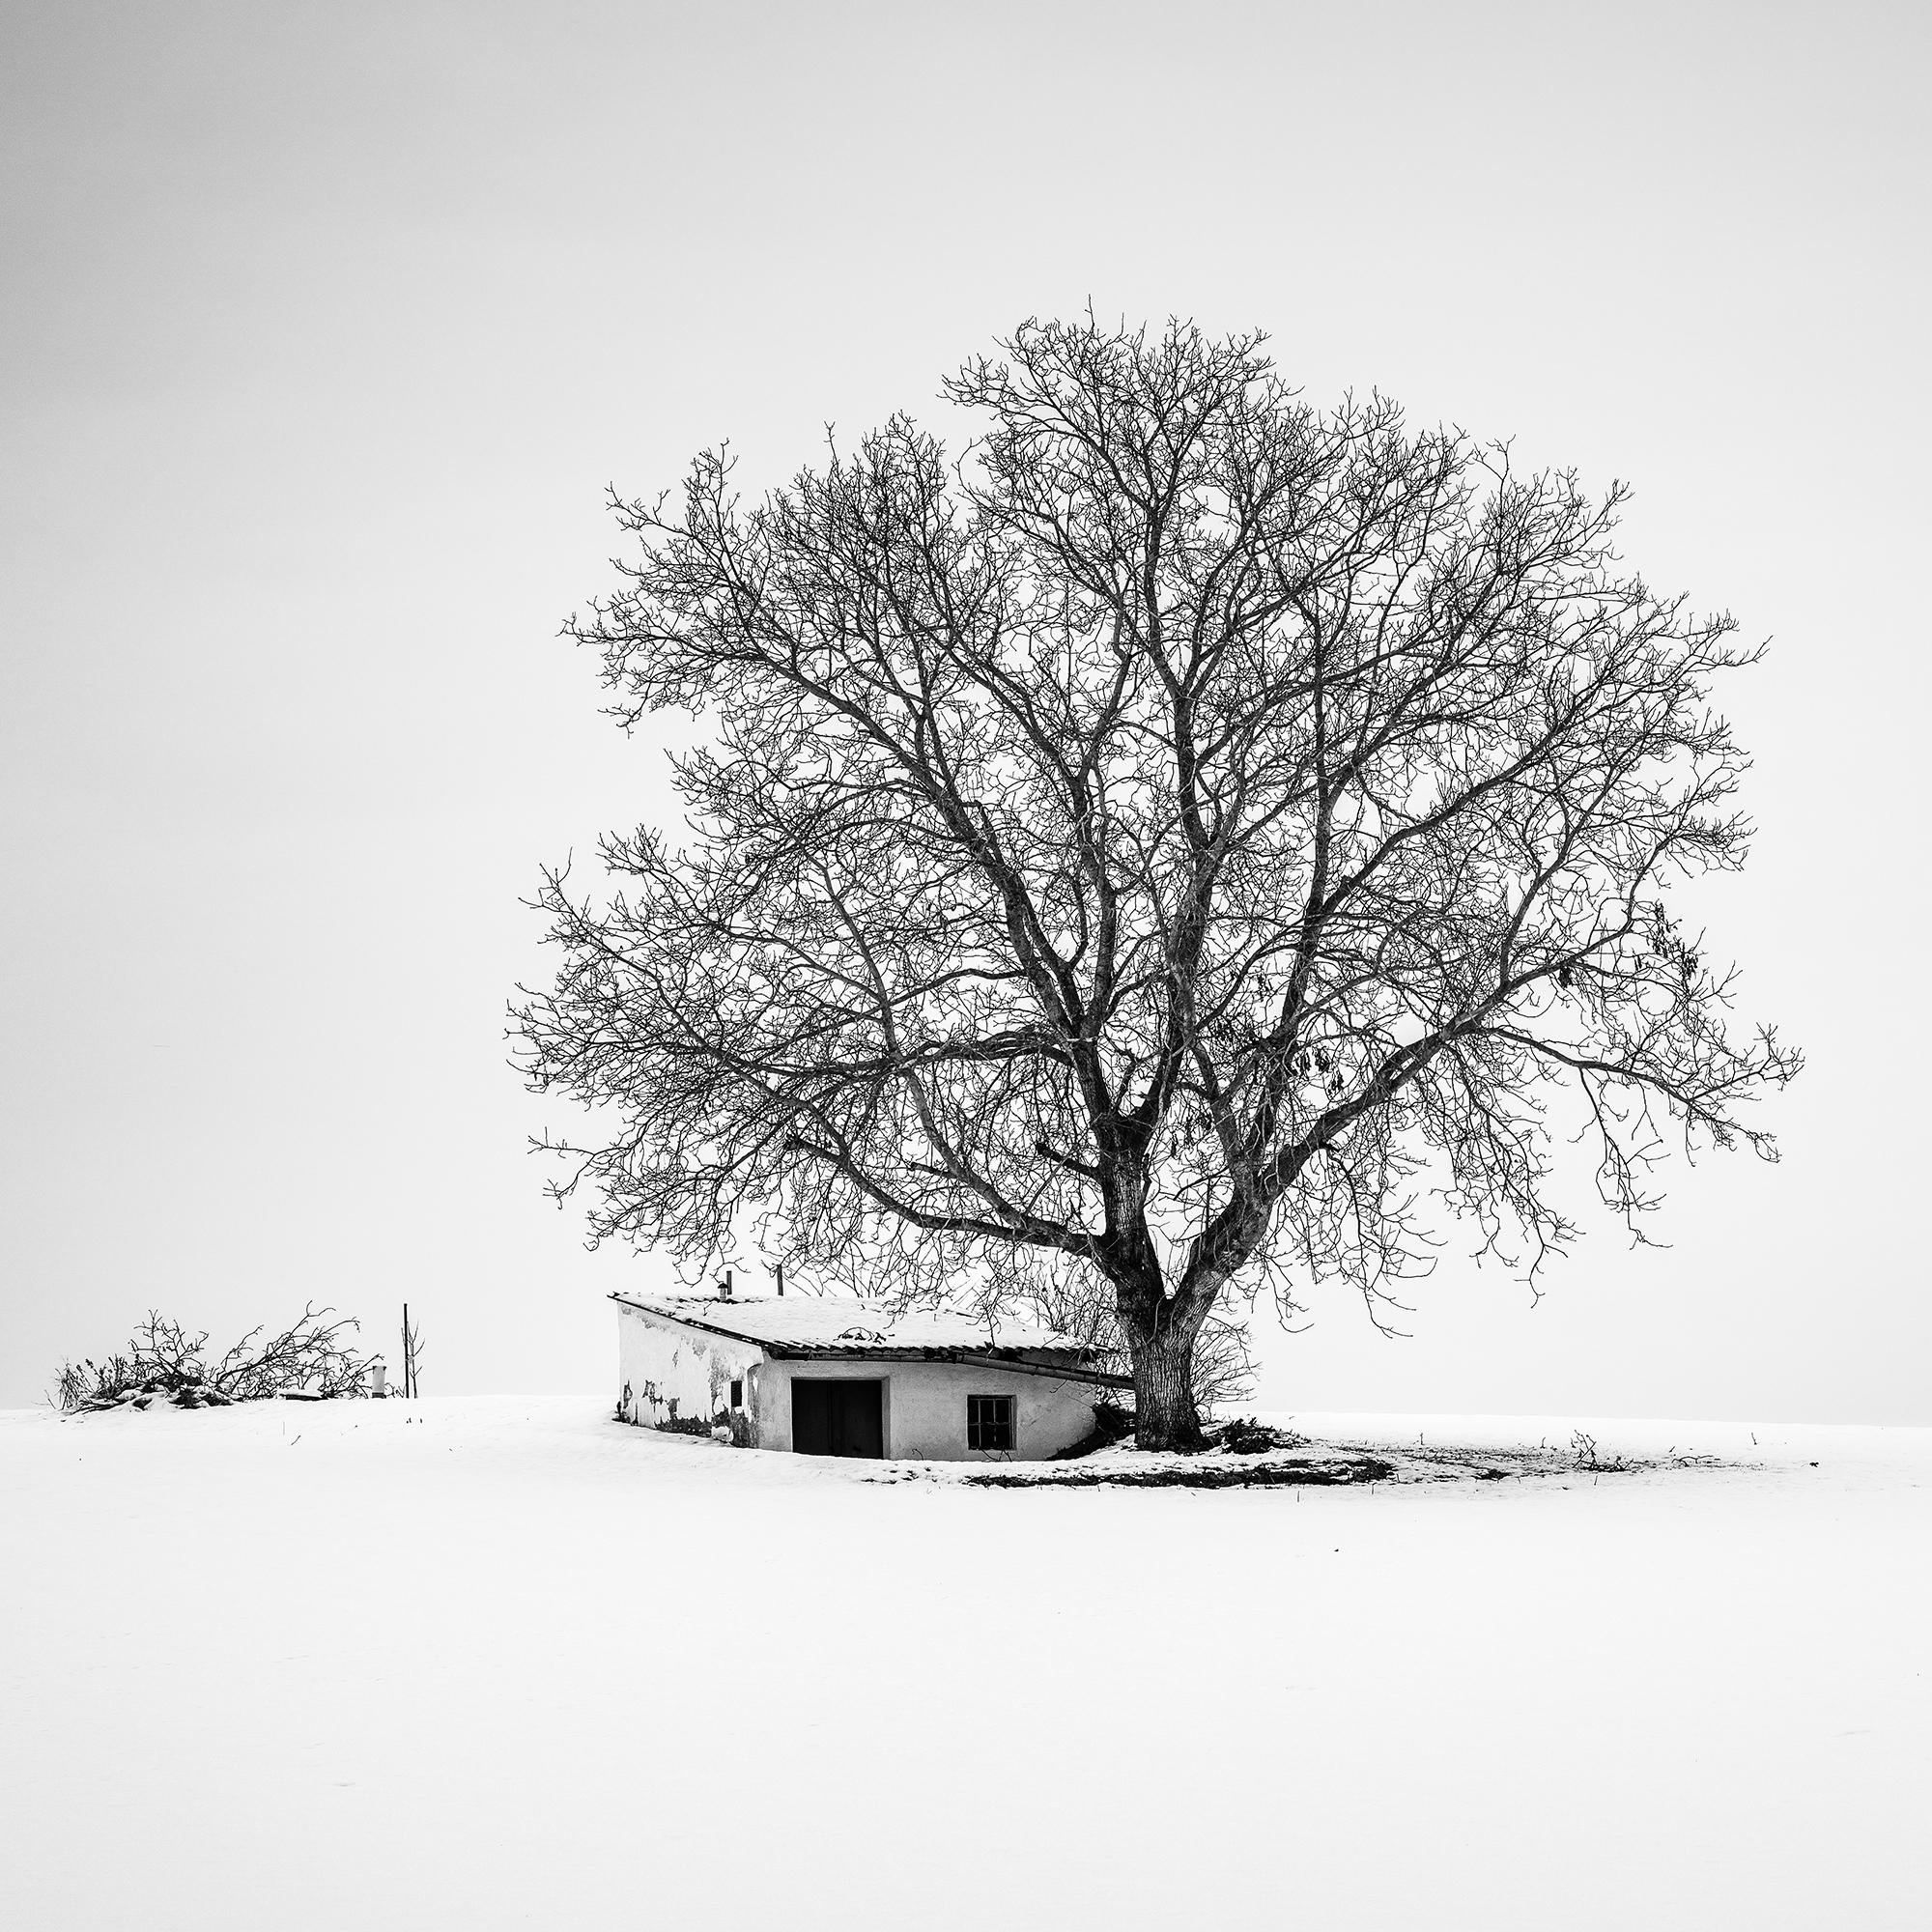 Wine Press House, snow, winter, black and white fine art landscape photography For Sale 2